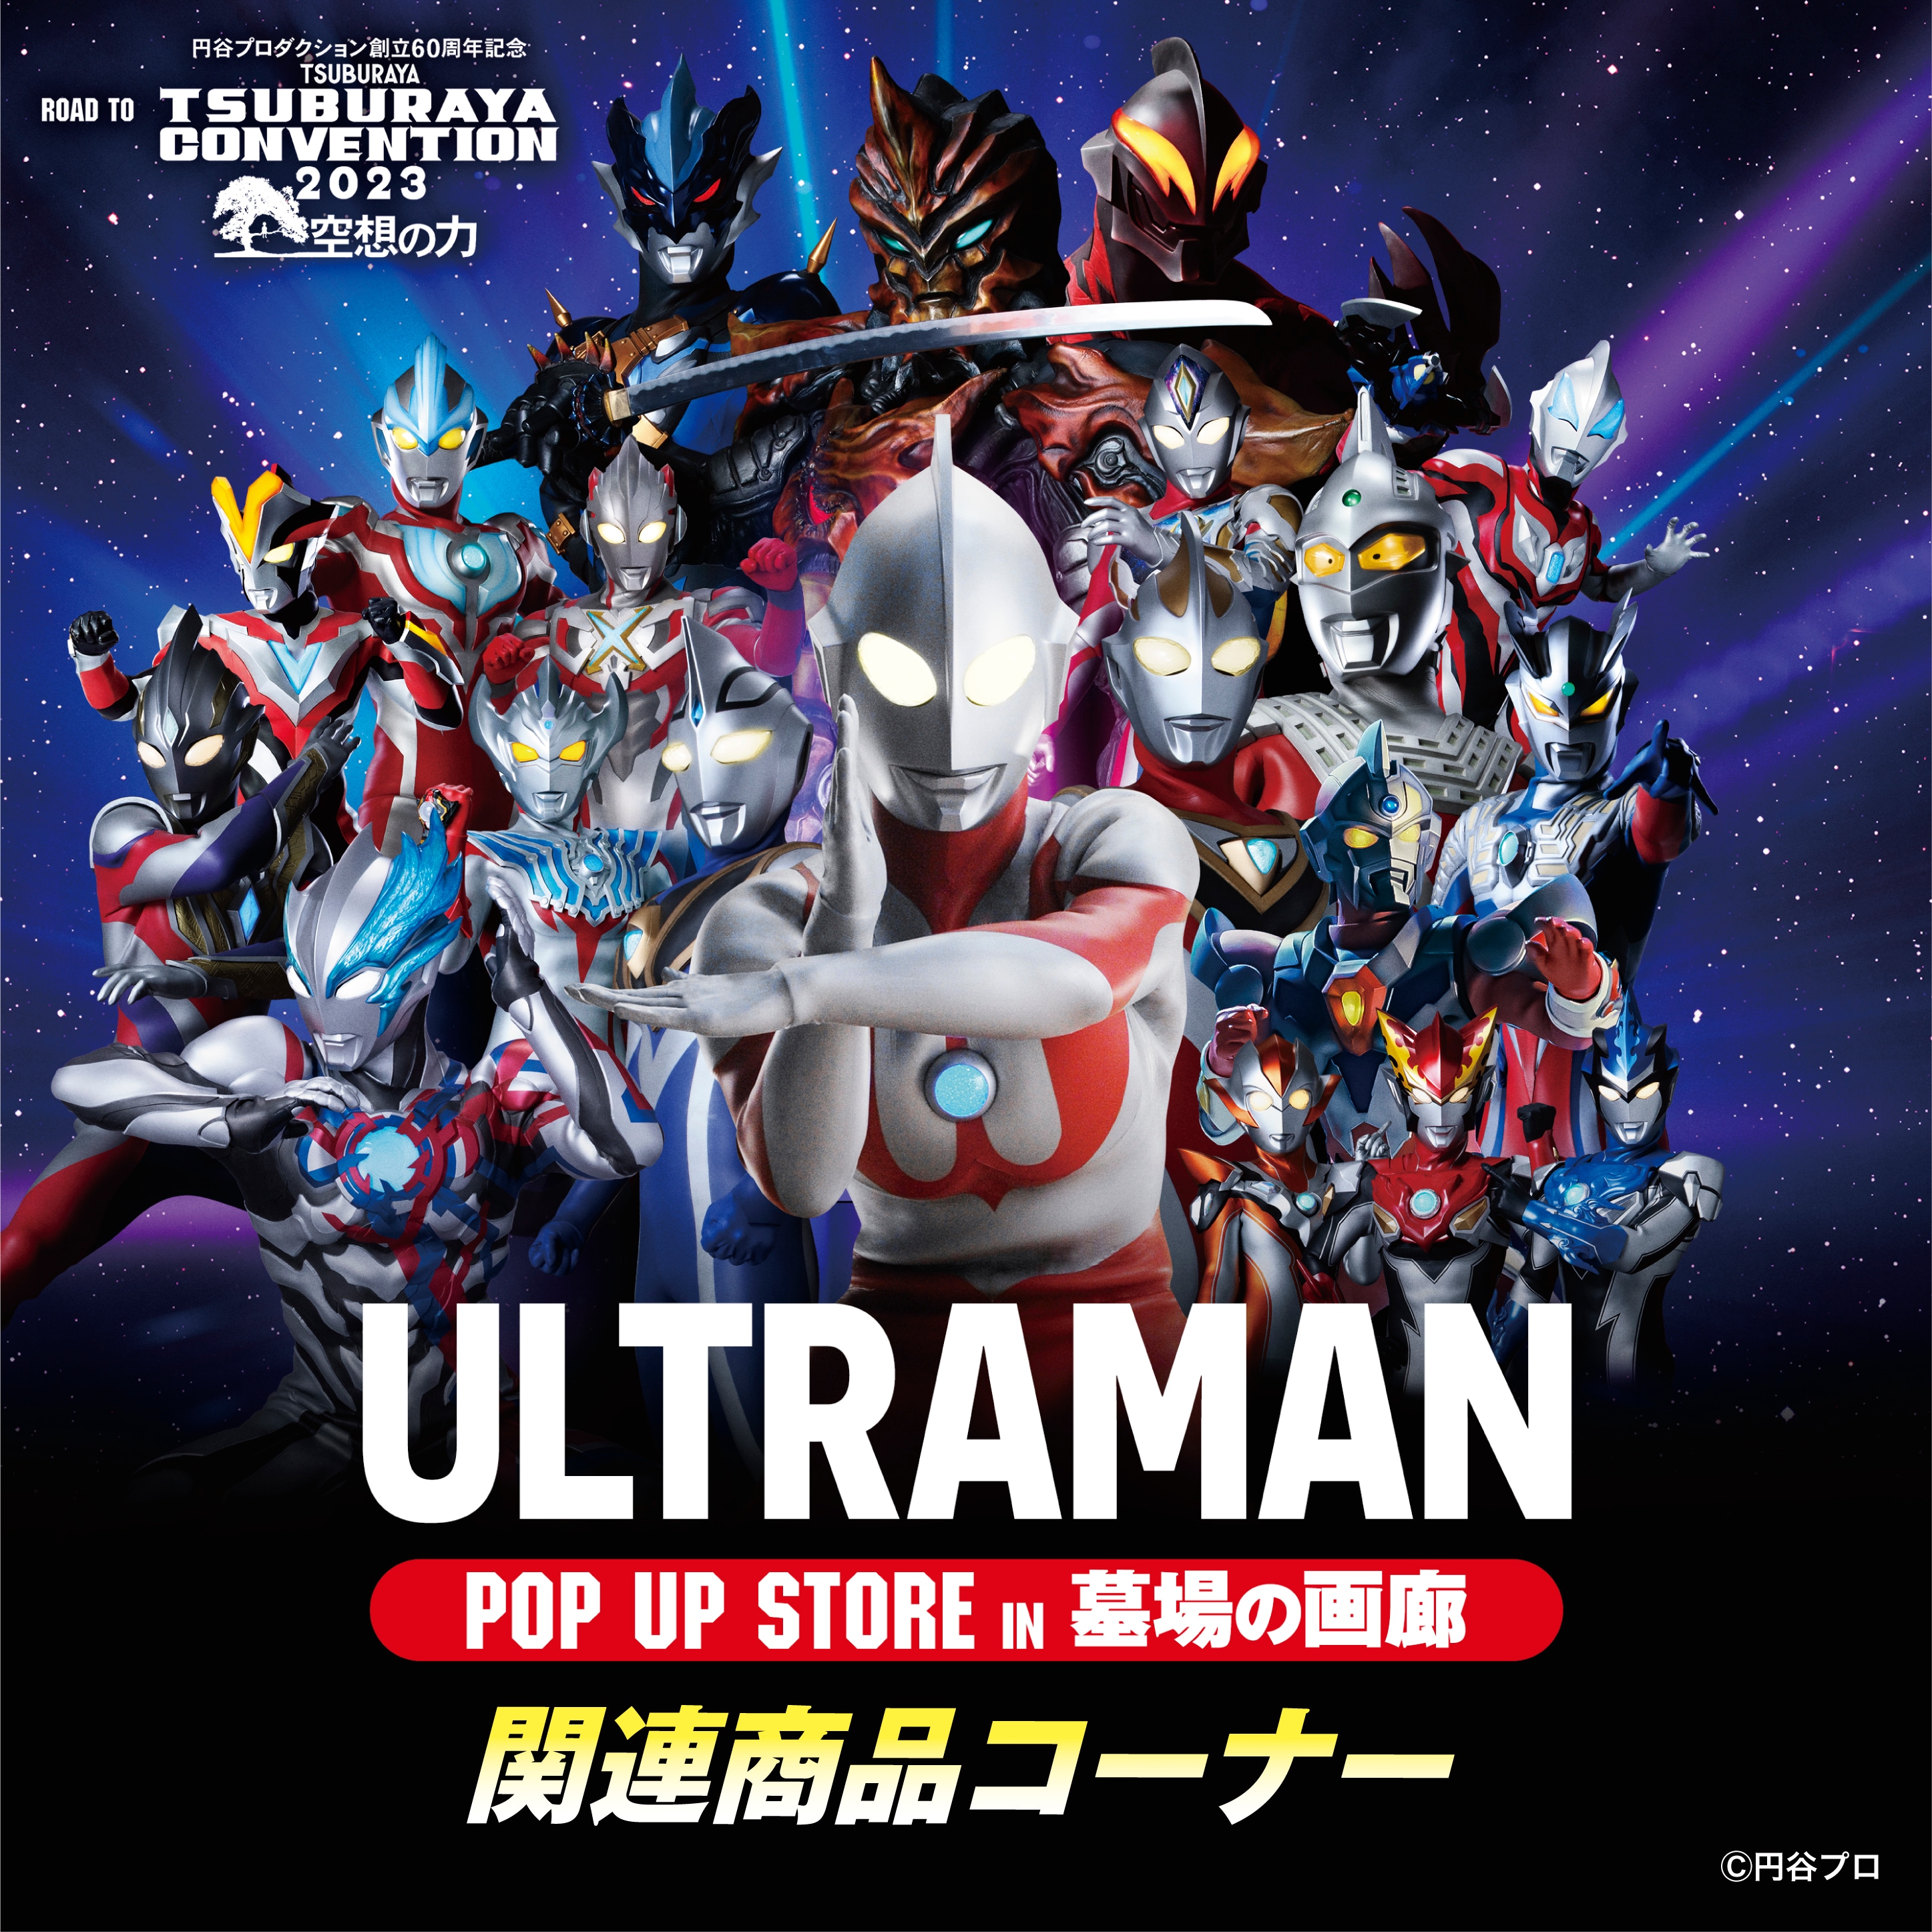 ROAD TO「TSUBURAYA CONVENTION」 POP UP STORE｜販売グッズ一覧｜墓場 